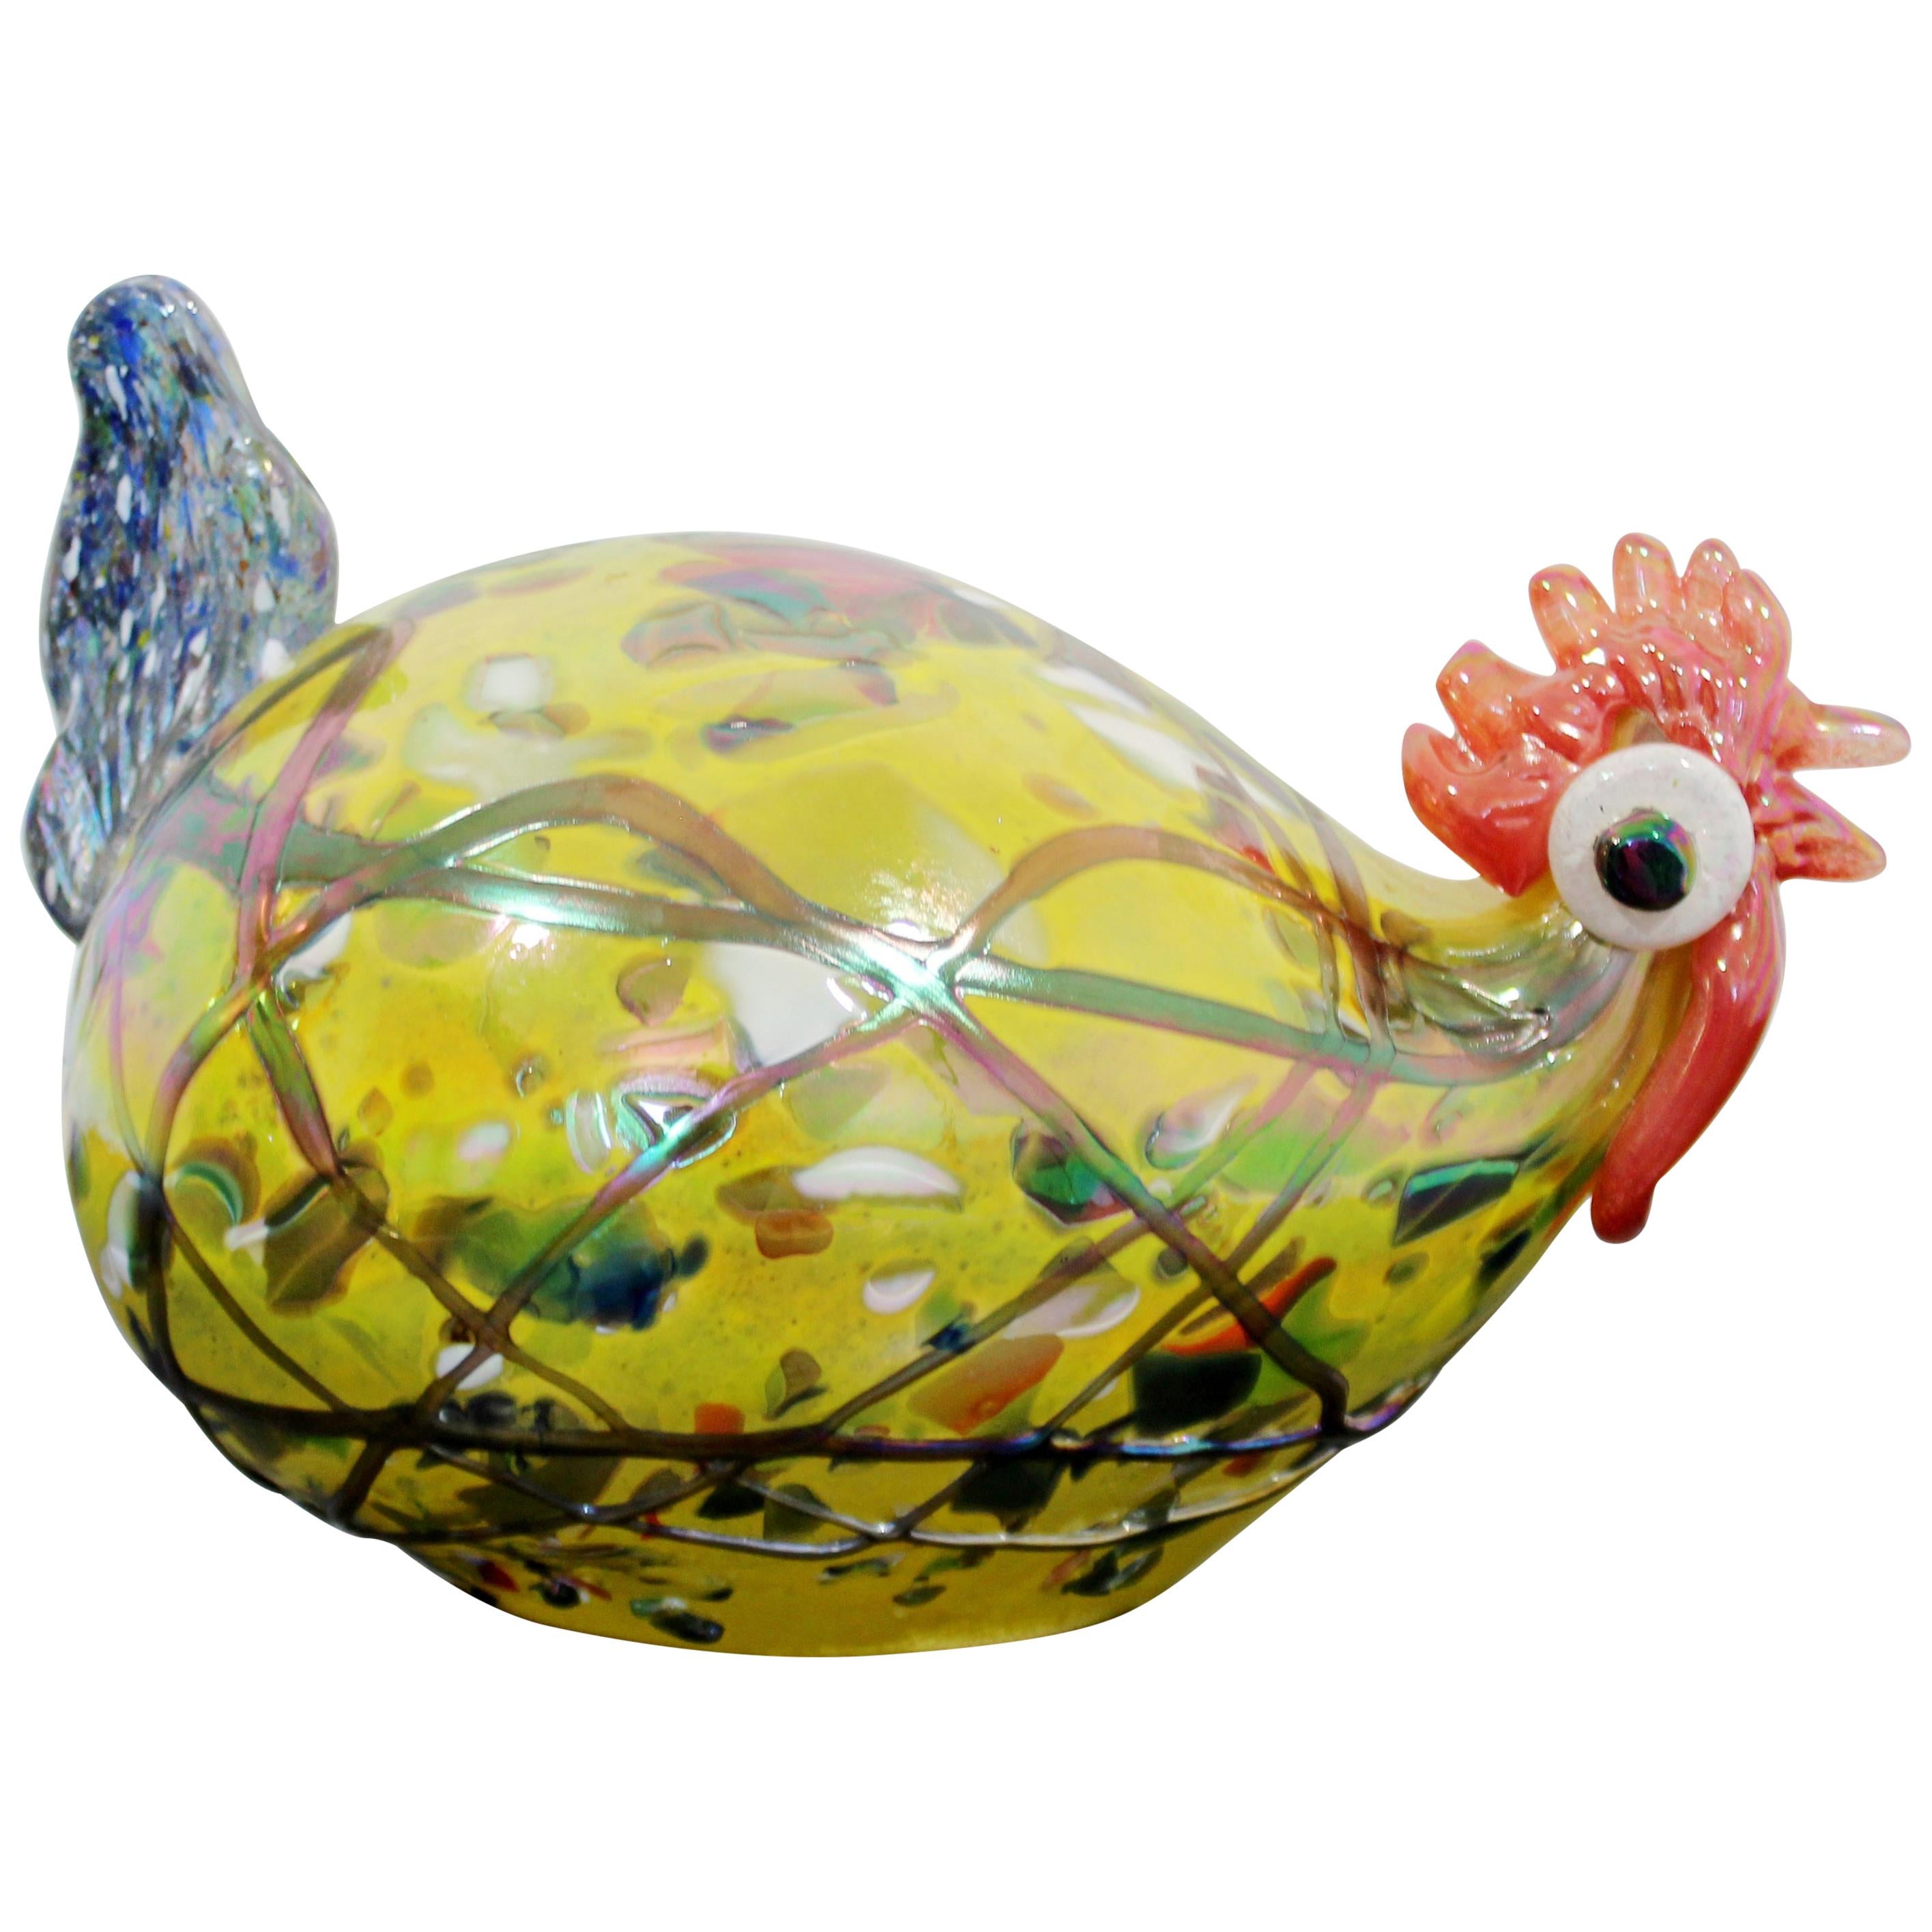 Contemporary Multicolored Glass Rooster Table Sculpture Signed 7/40